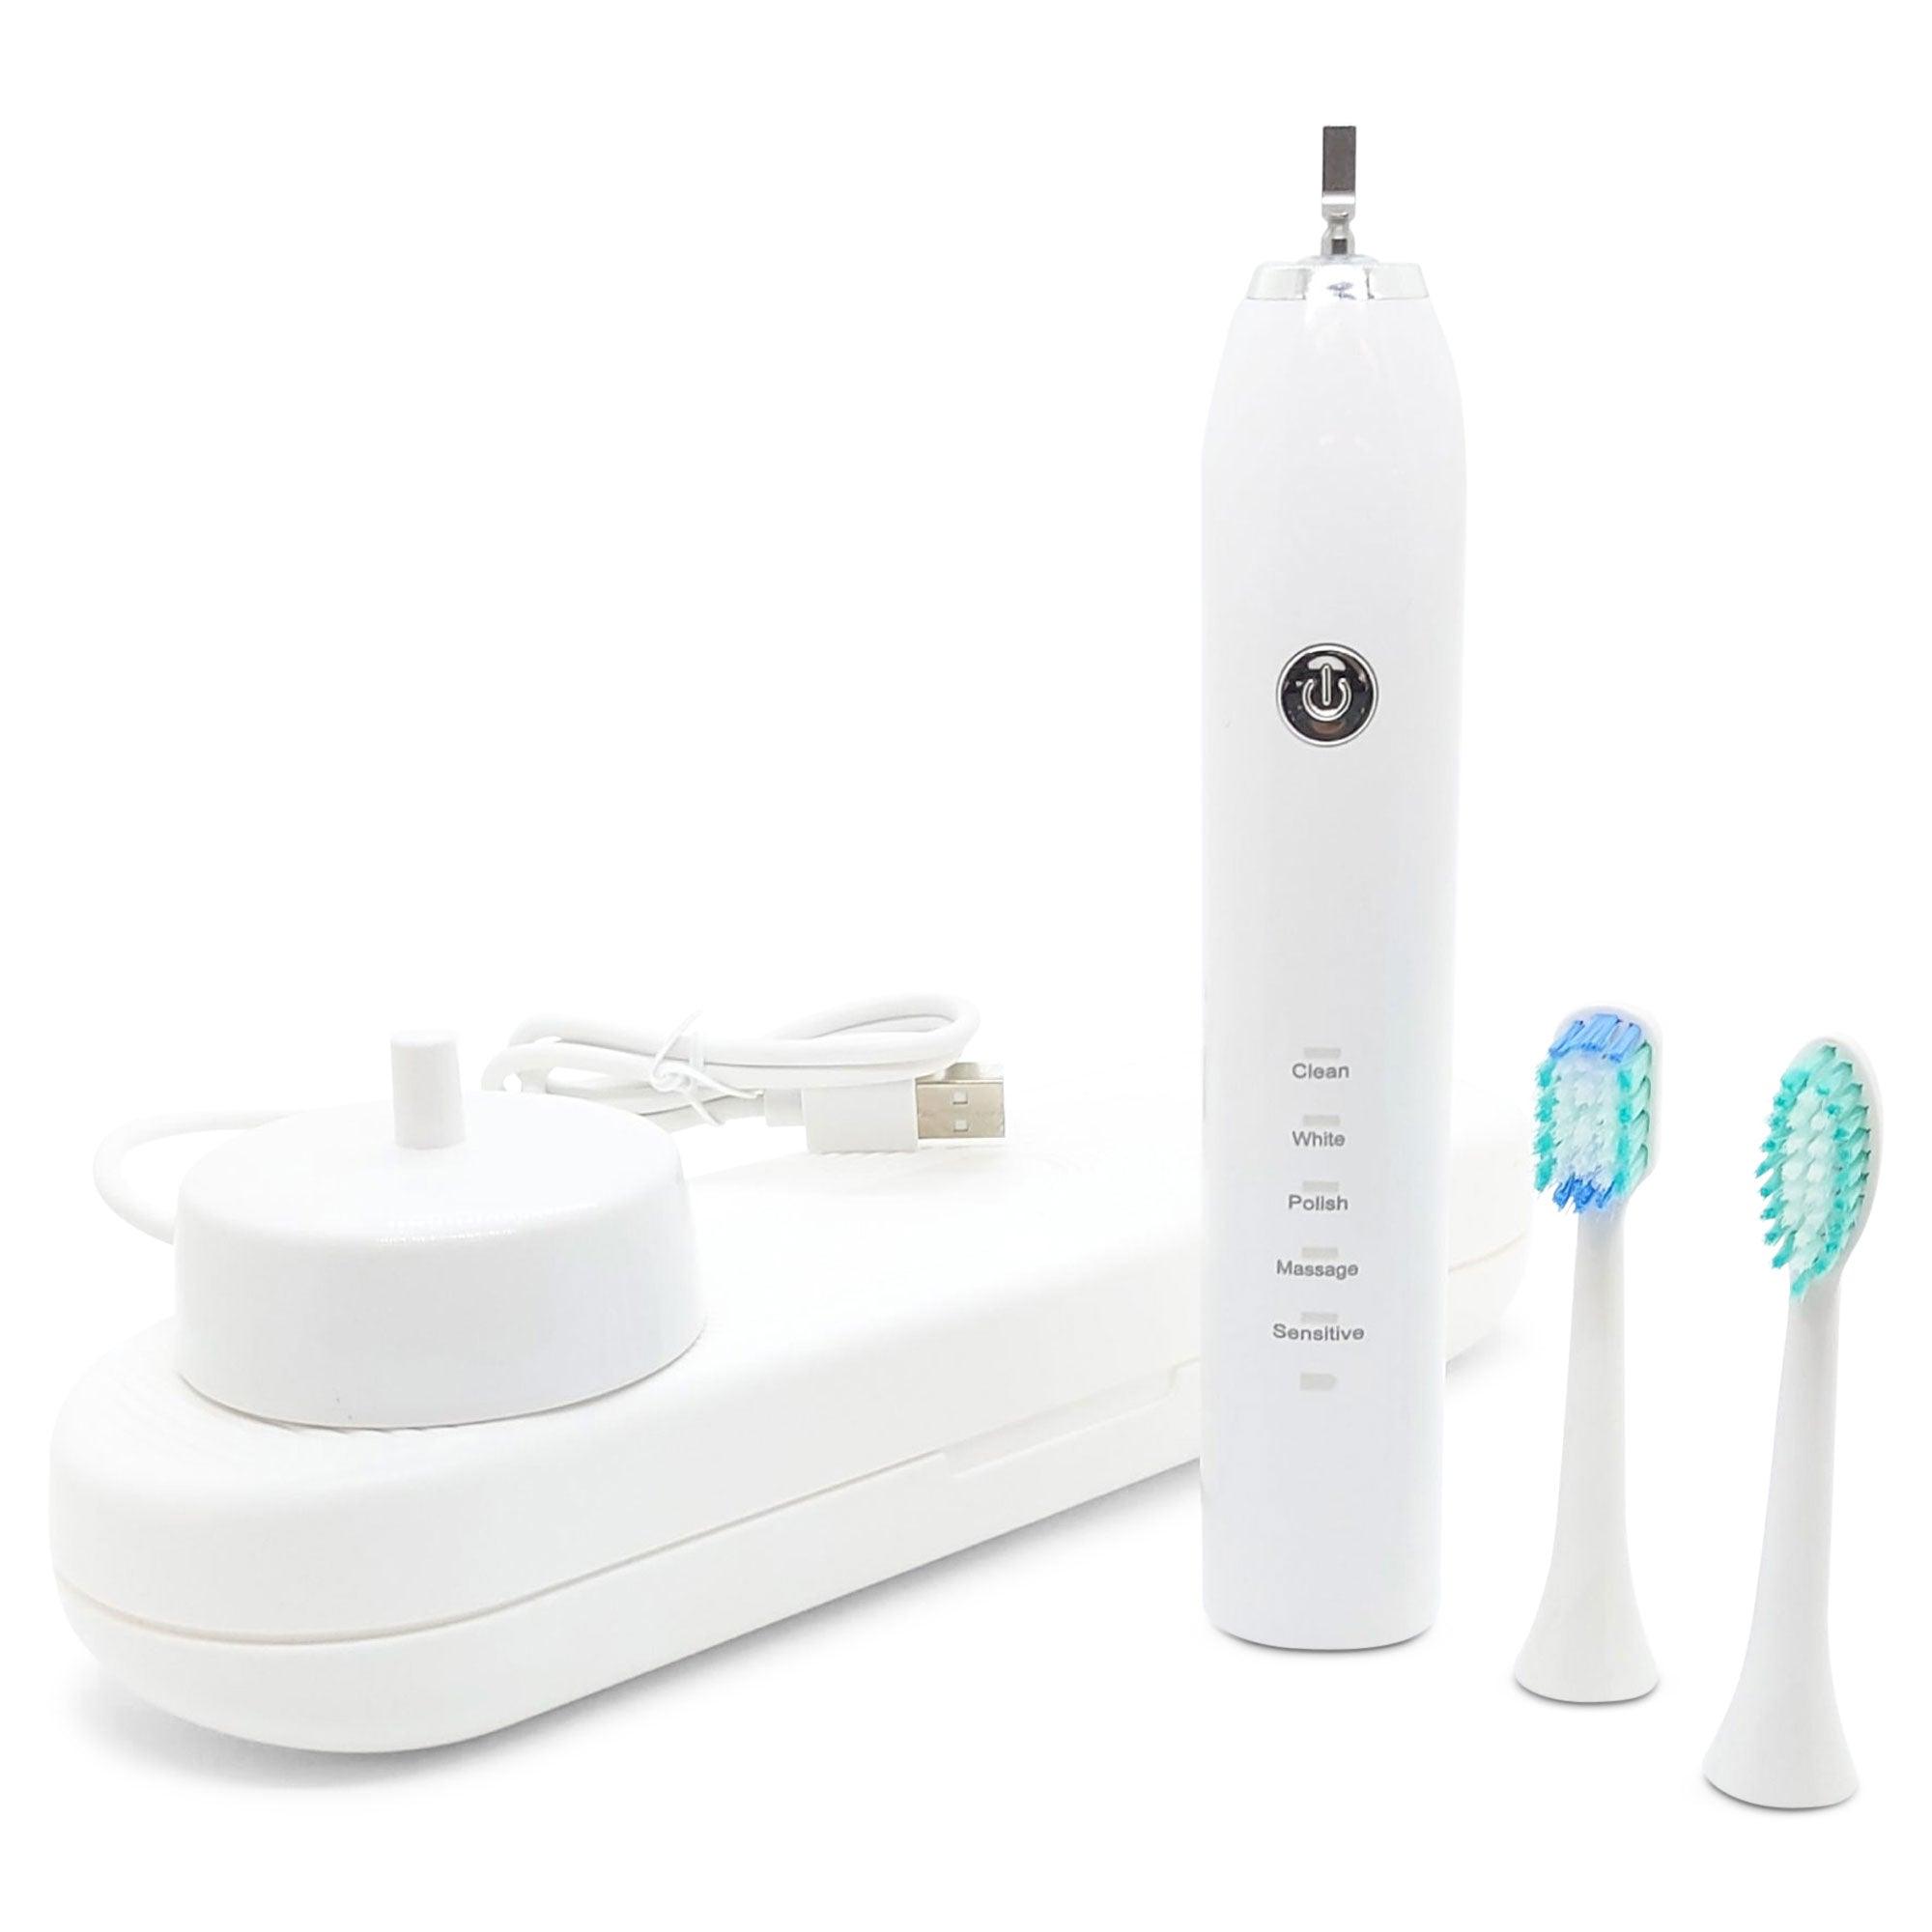 Buy Sonic Electric Toothbrush White USB Wireless Charging Smart 5 Modes 2 Heads Case discounted | Products On Sale Australia